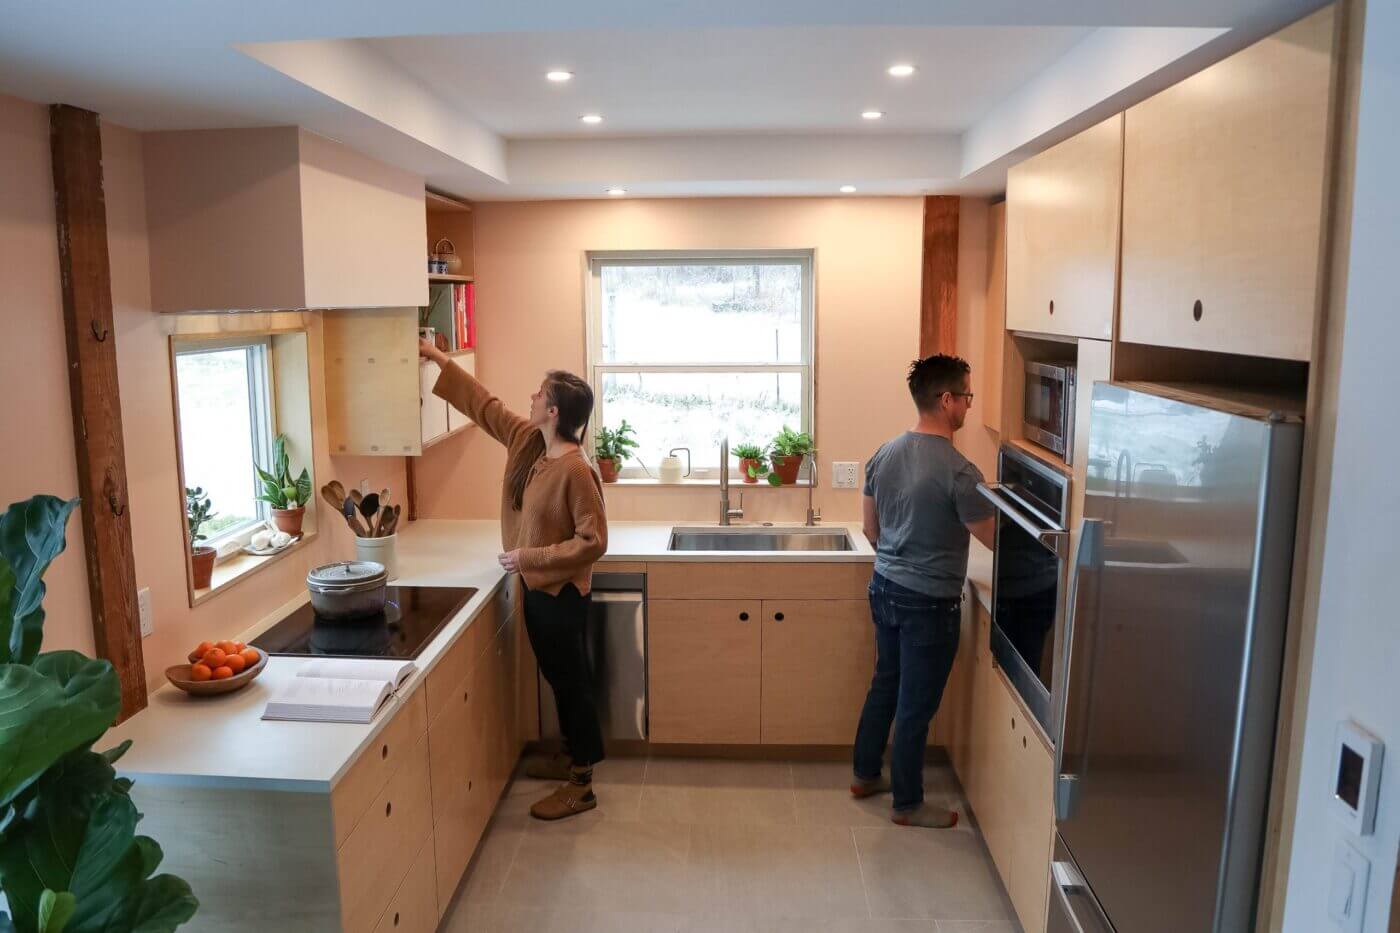 plywood kitchen cabinets